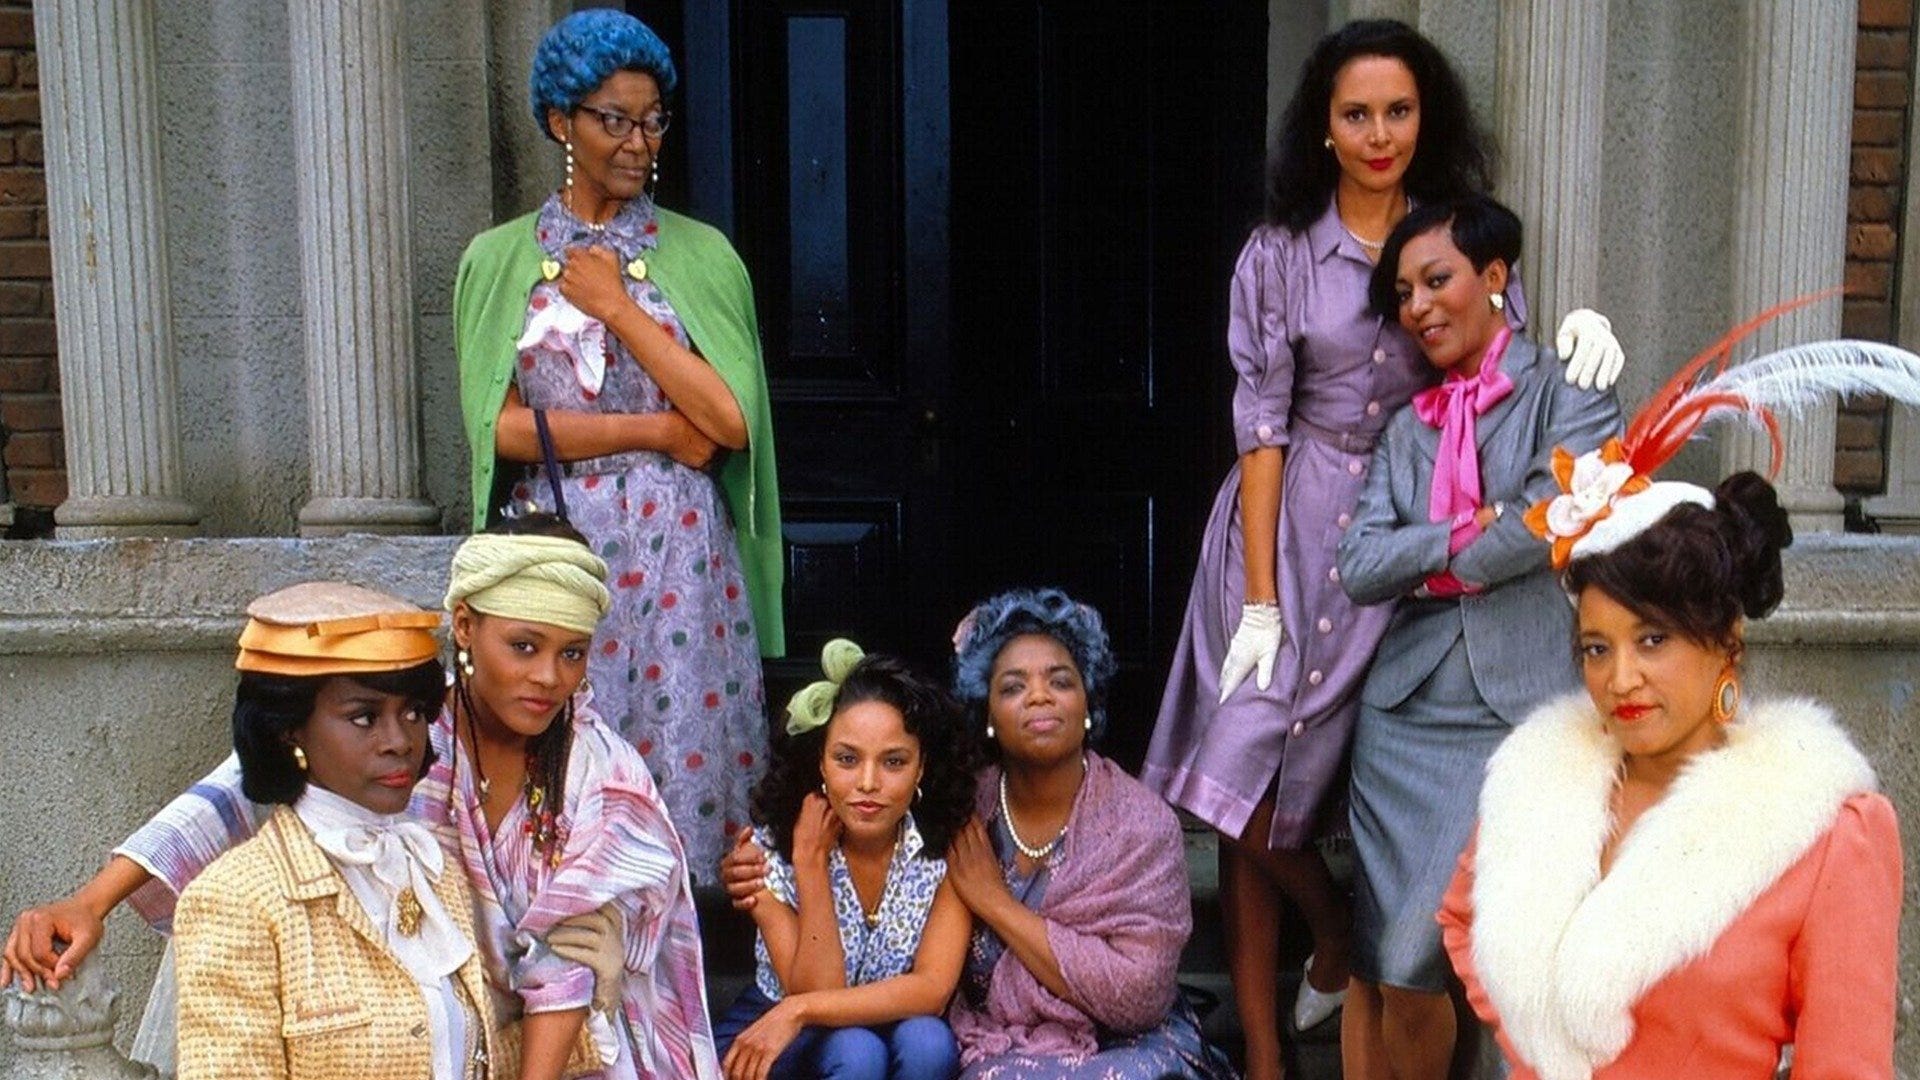 30th Anniversary: The Women of Brewster Place' & Its Authentic Portrayal of  Black Women on TV | by Ashley Gail Terrell | Medium